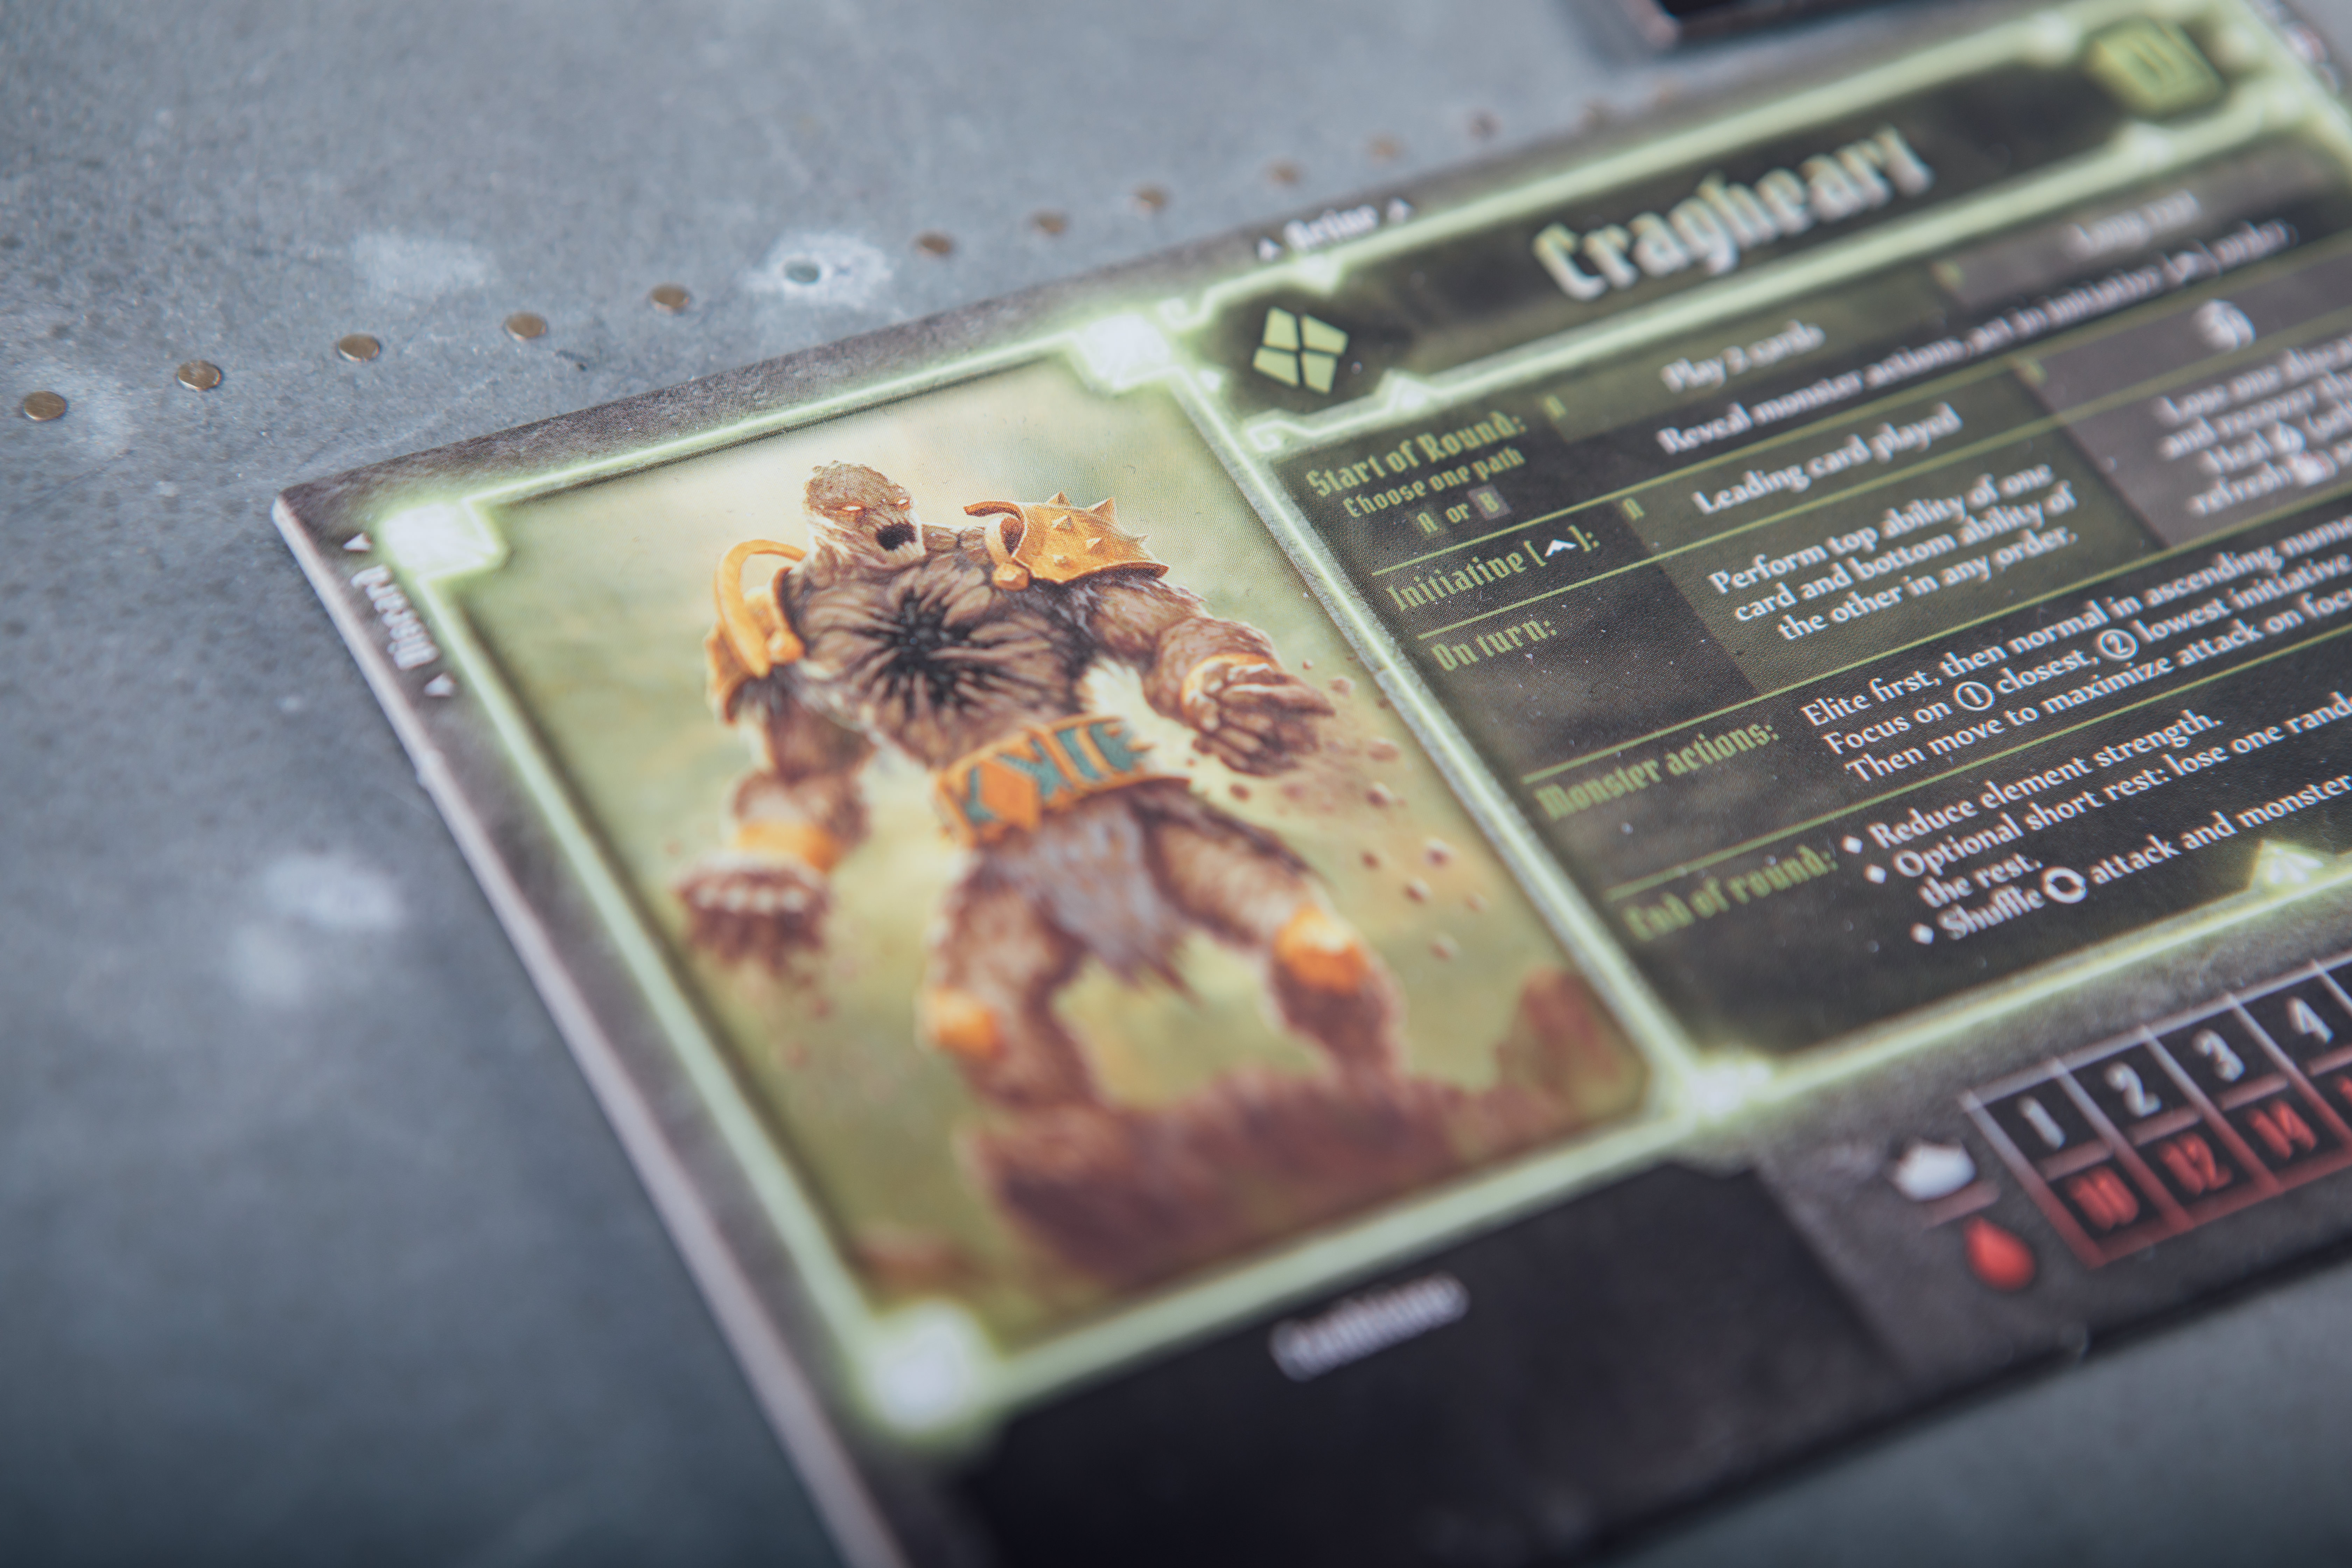 Gloomhaven Crypt of the damned Cragheart card